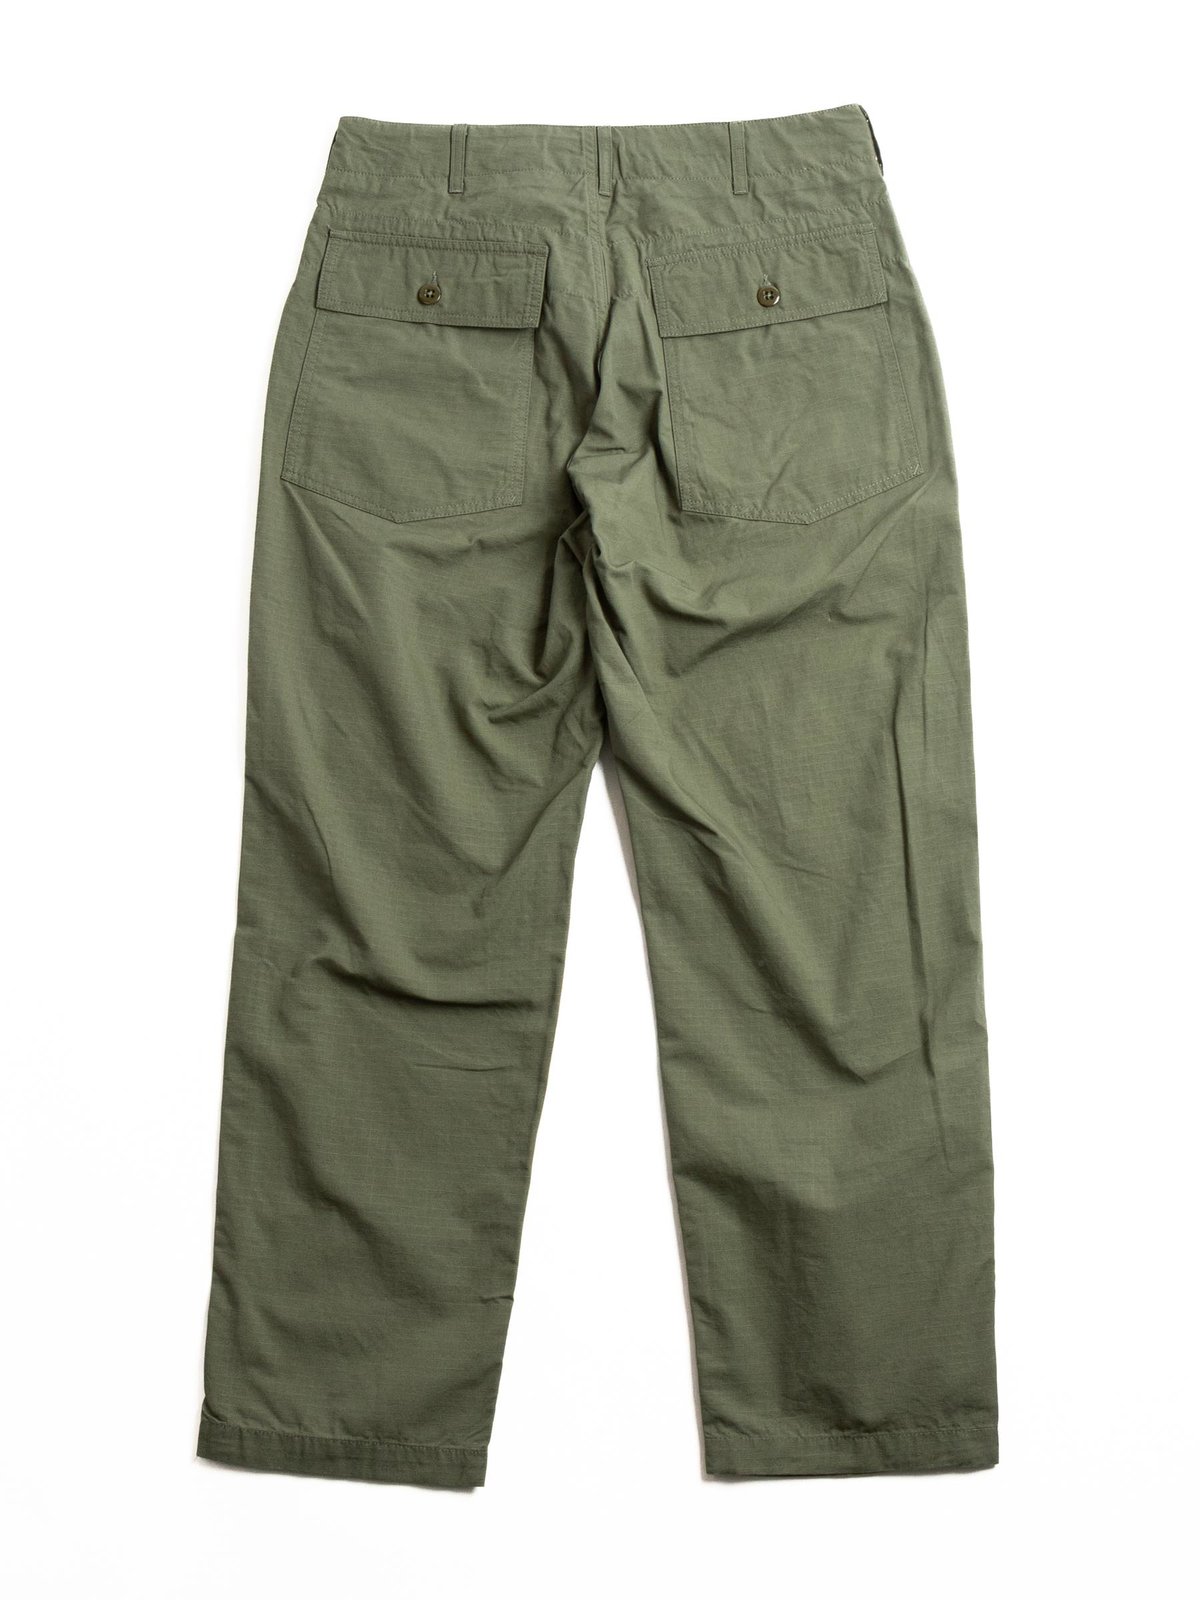 FATIGUE PANT OLIVE COTTON RIPSTOP - Image 7